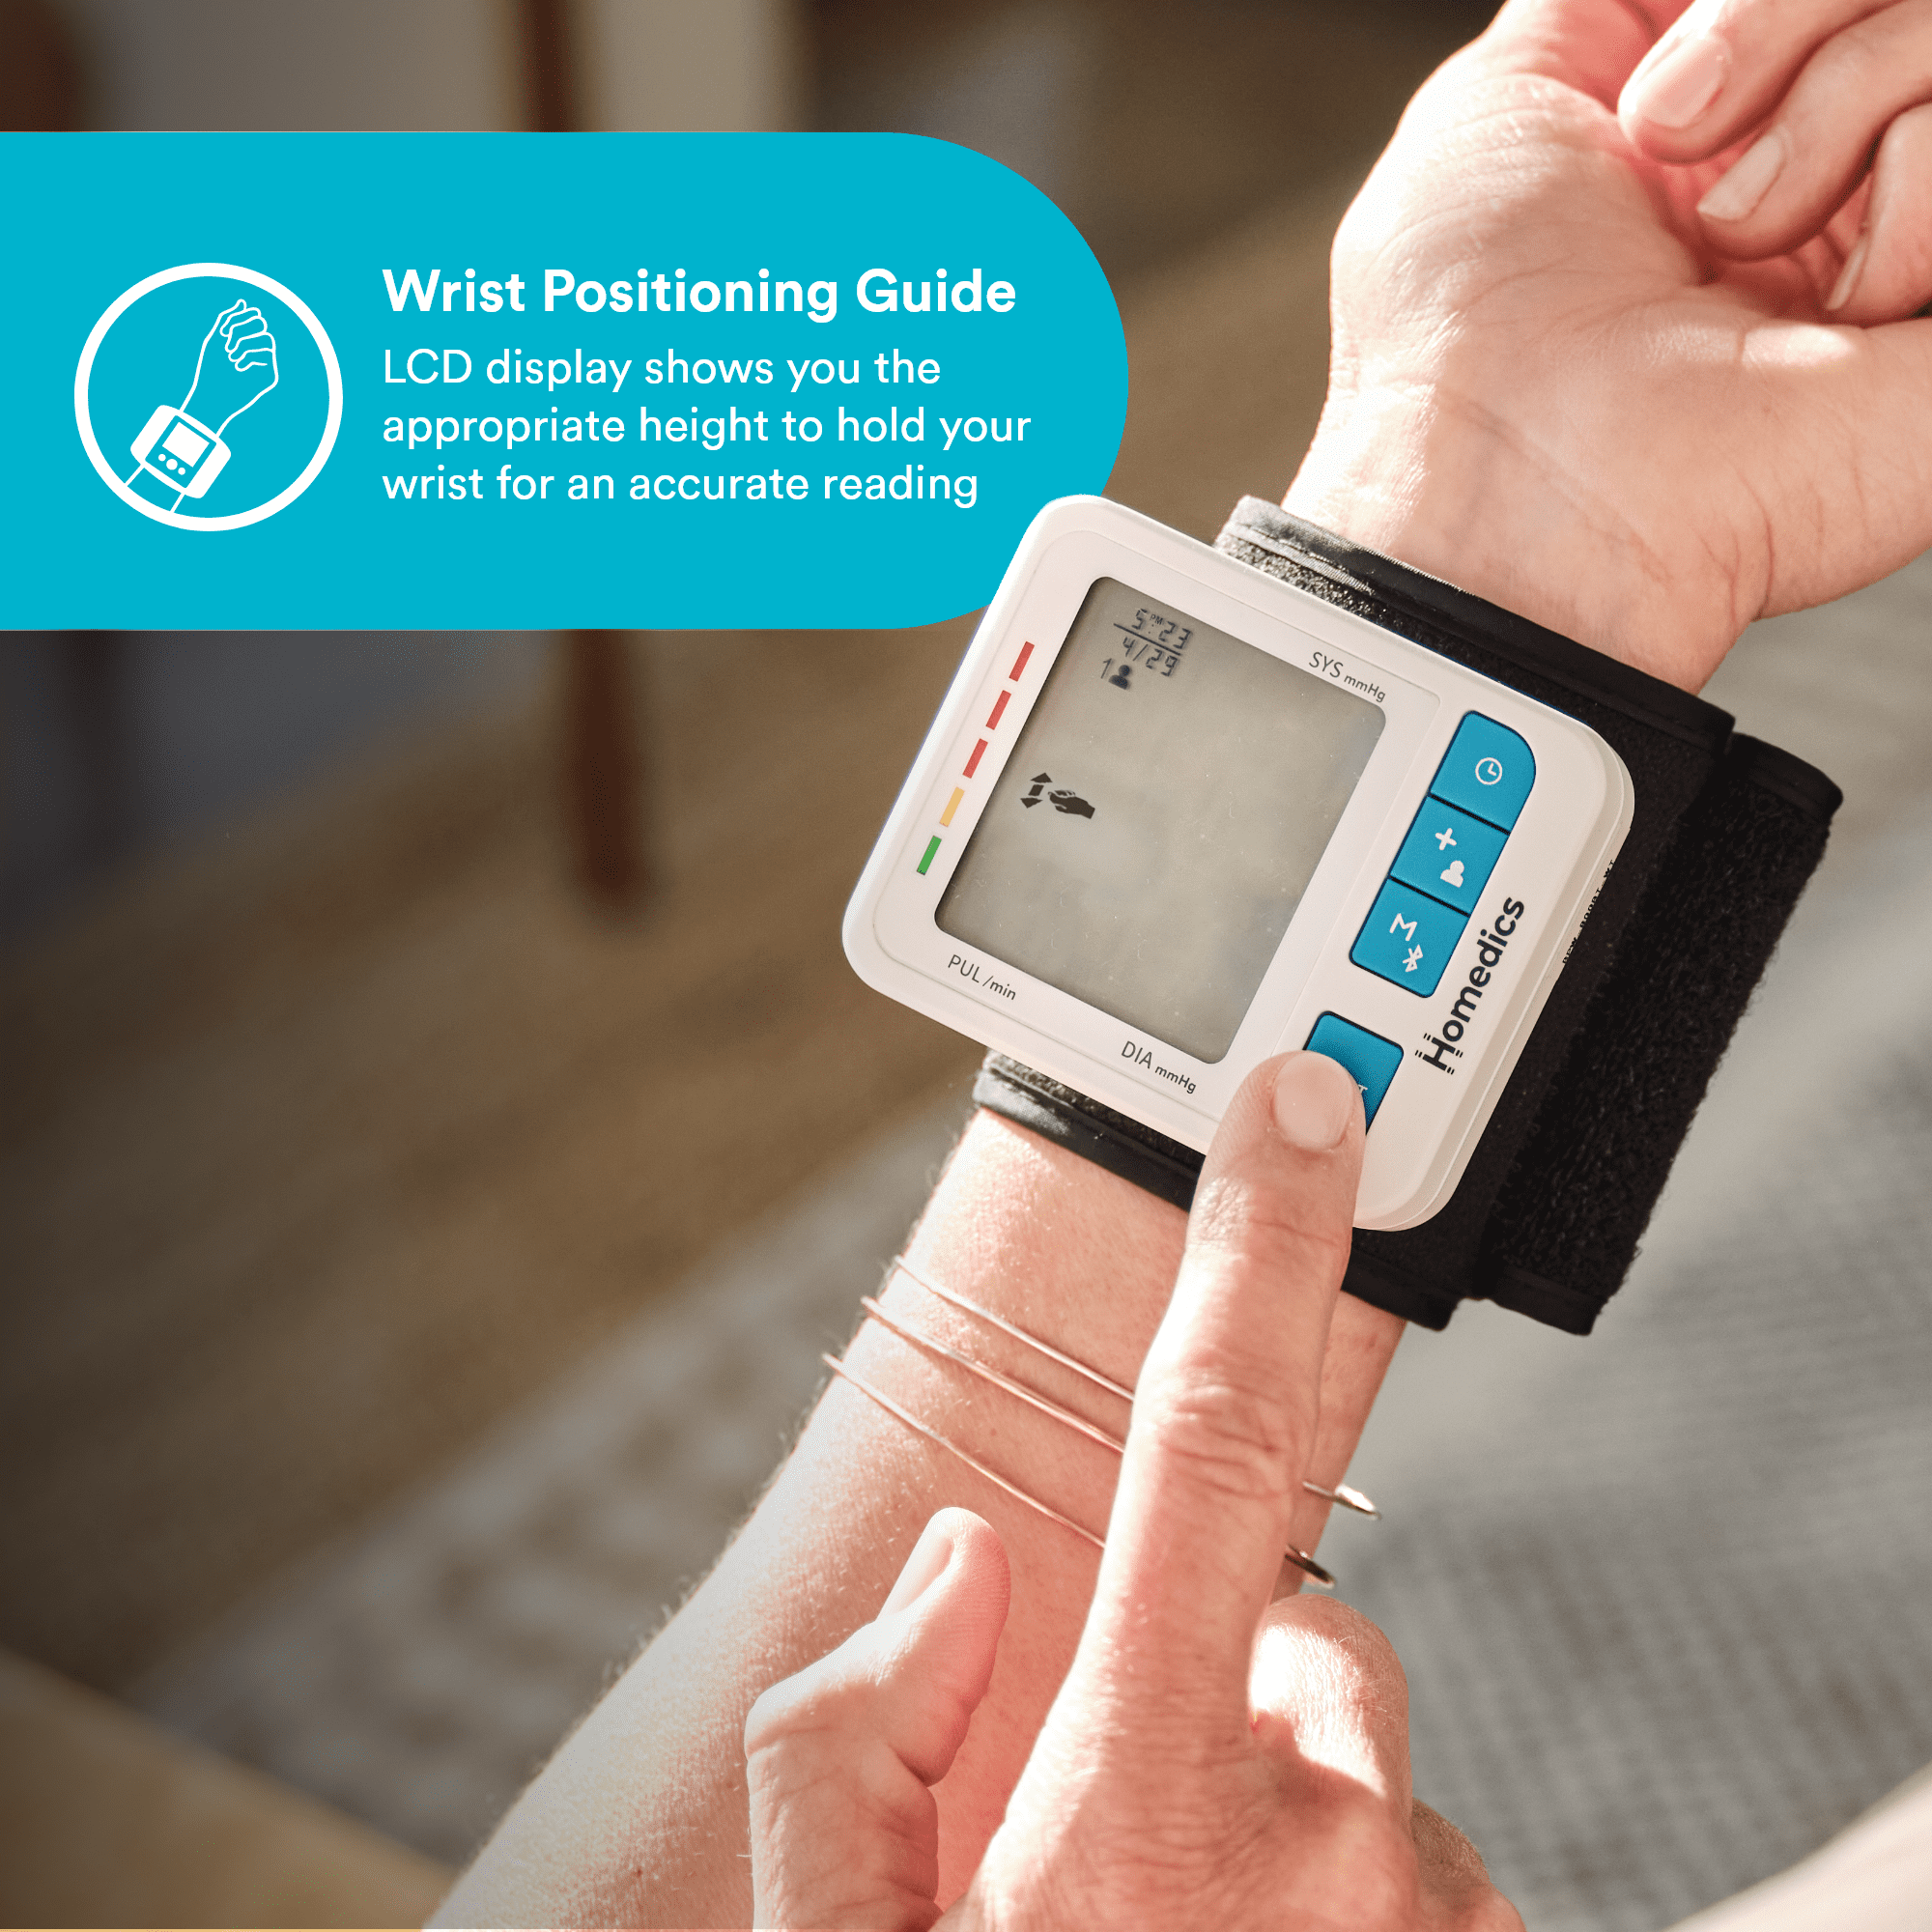 Homedics® 5-Day Trend-at-a-Glance Arm 700 Series Blood Pressure